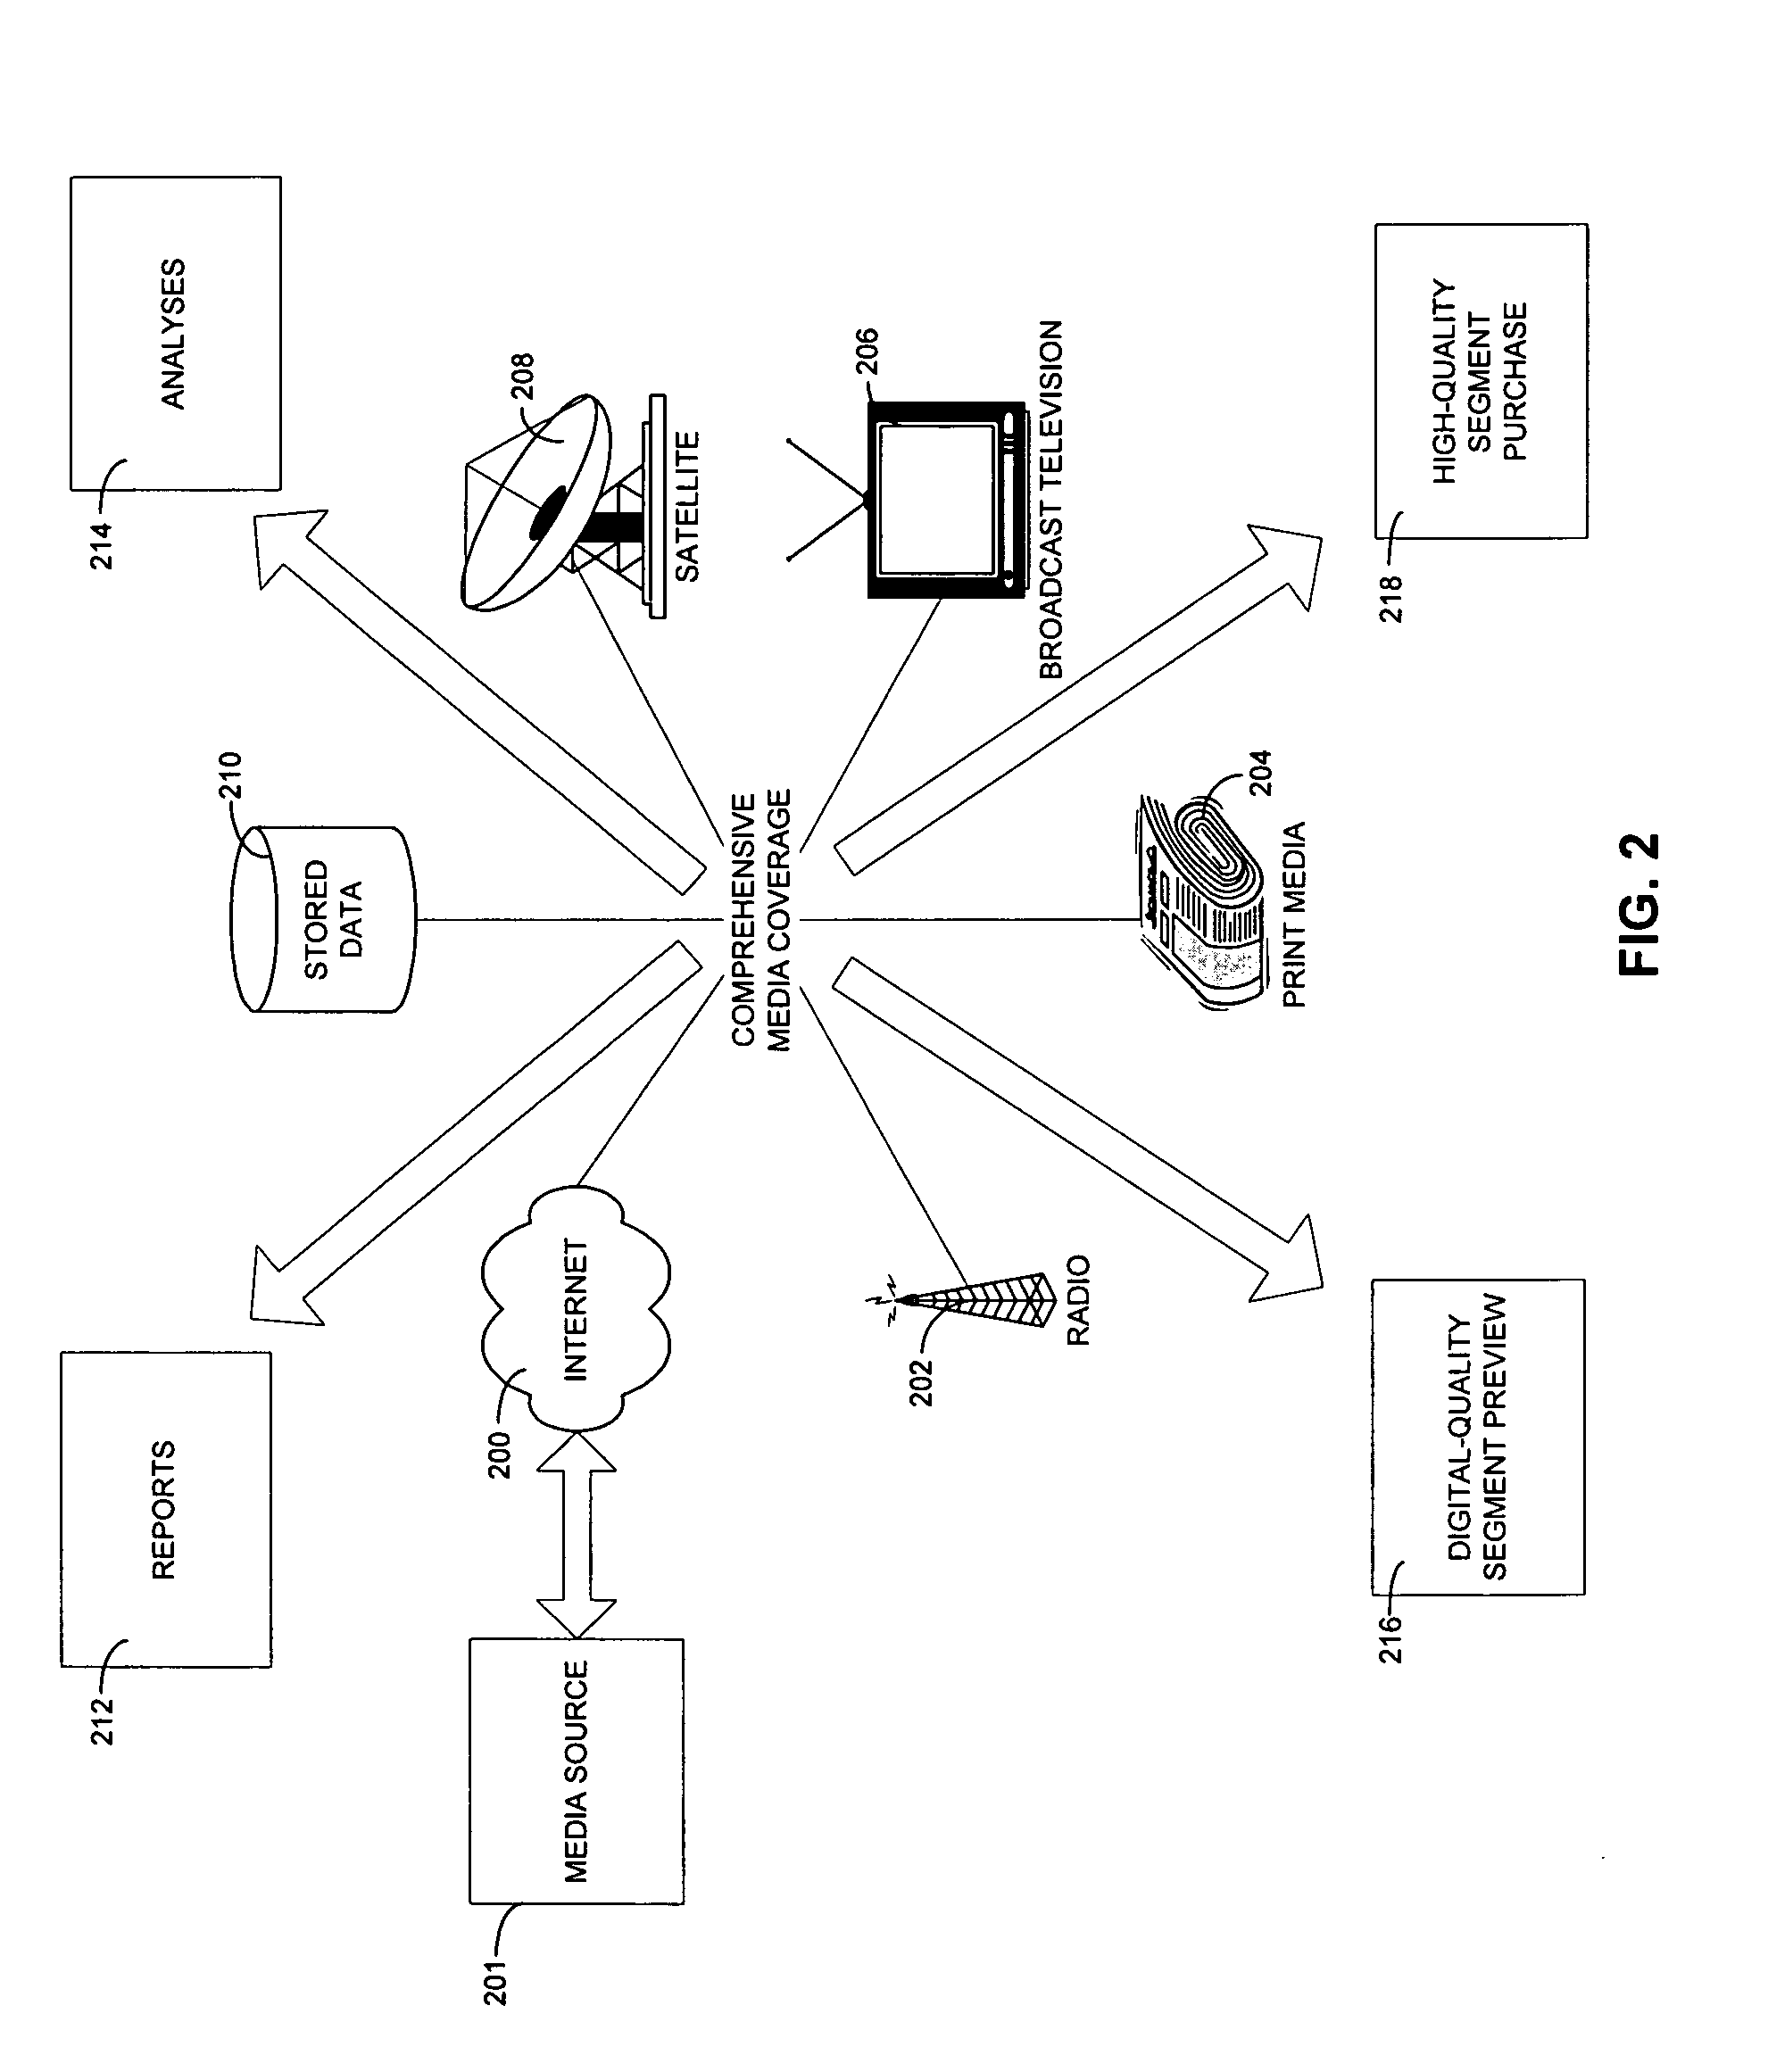 Method for integrated media preview, analysis, purchase, and display